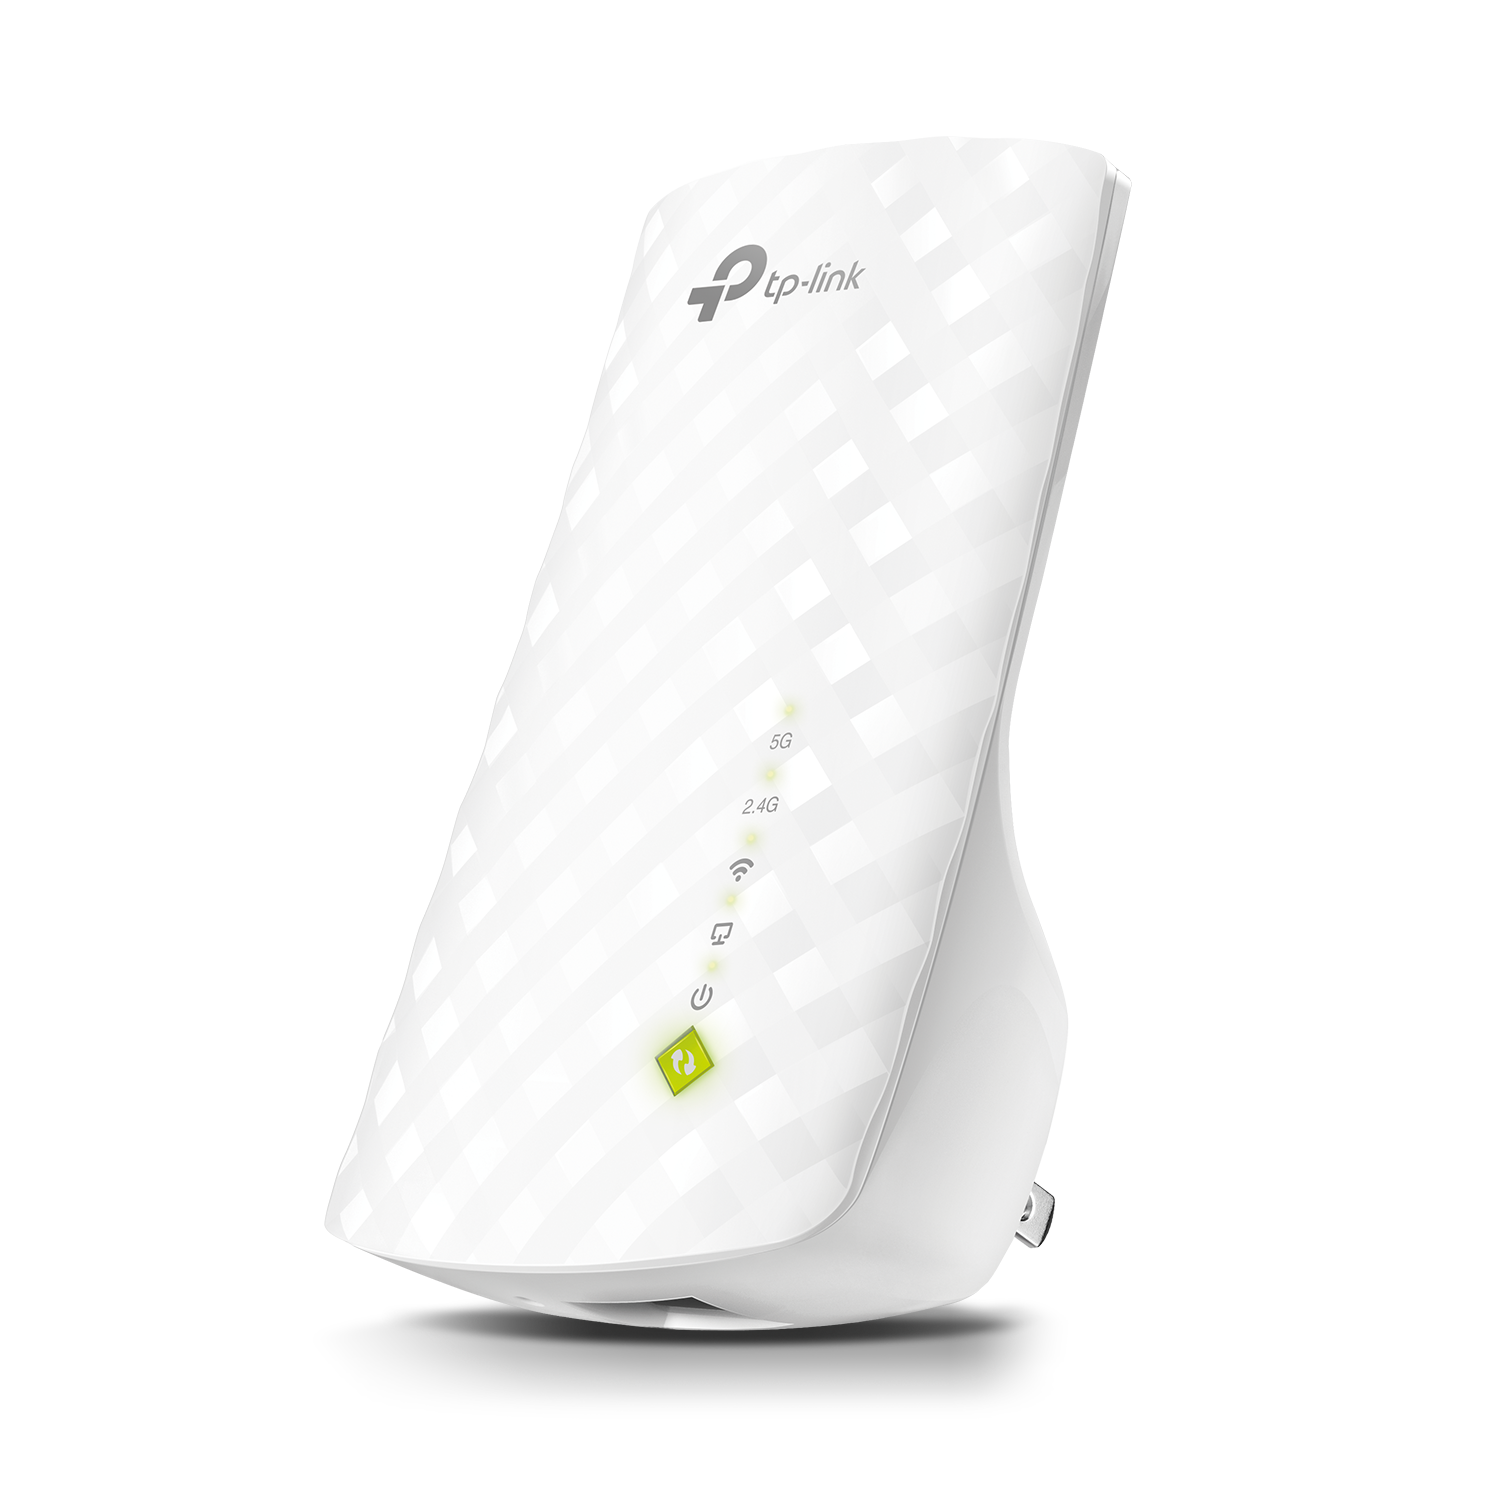 TP-Link RE220 AC750 Dual Band WiFi Range Extender $12 + Free Shipping